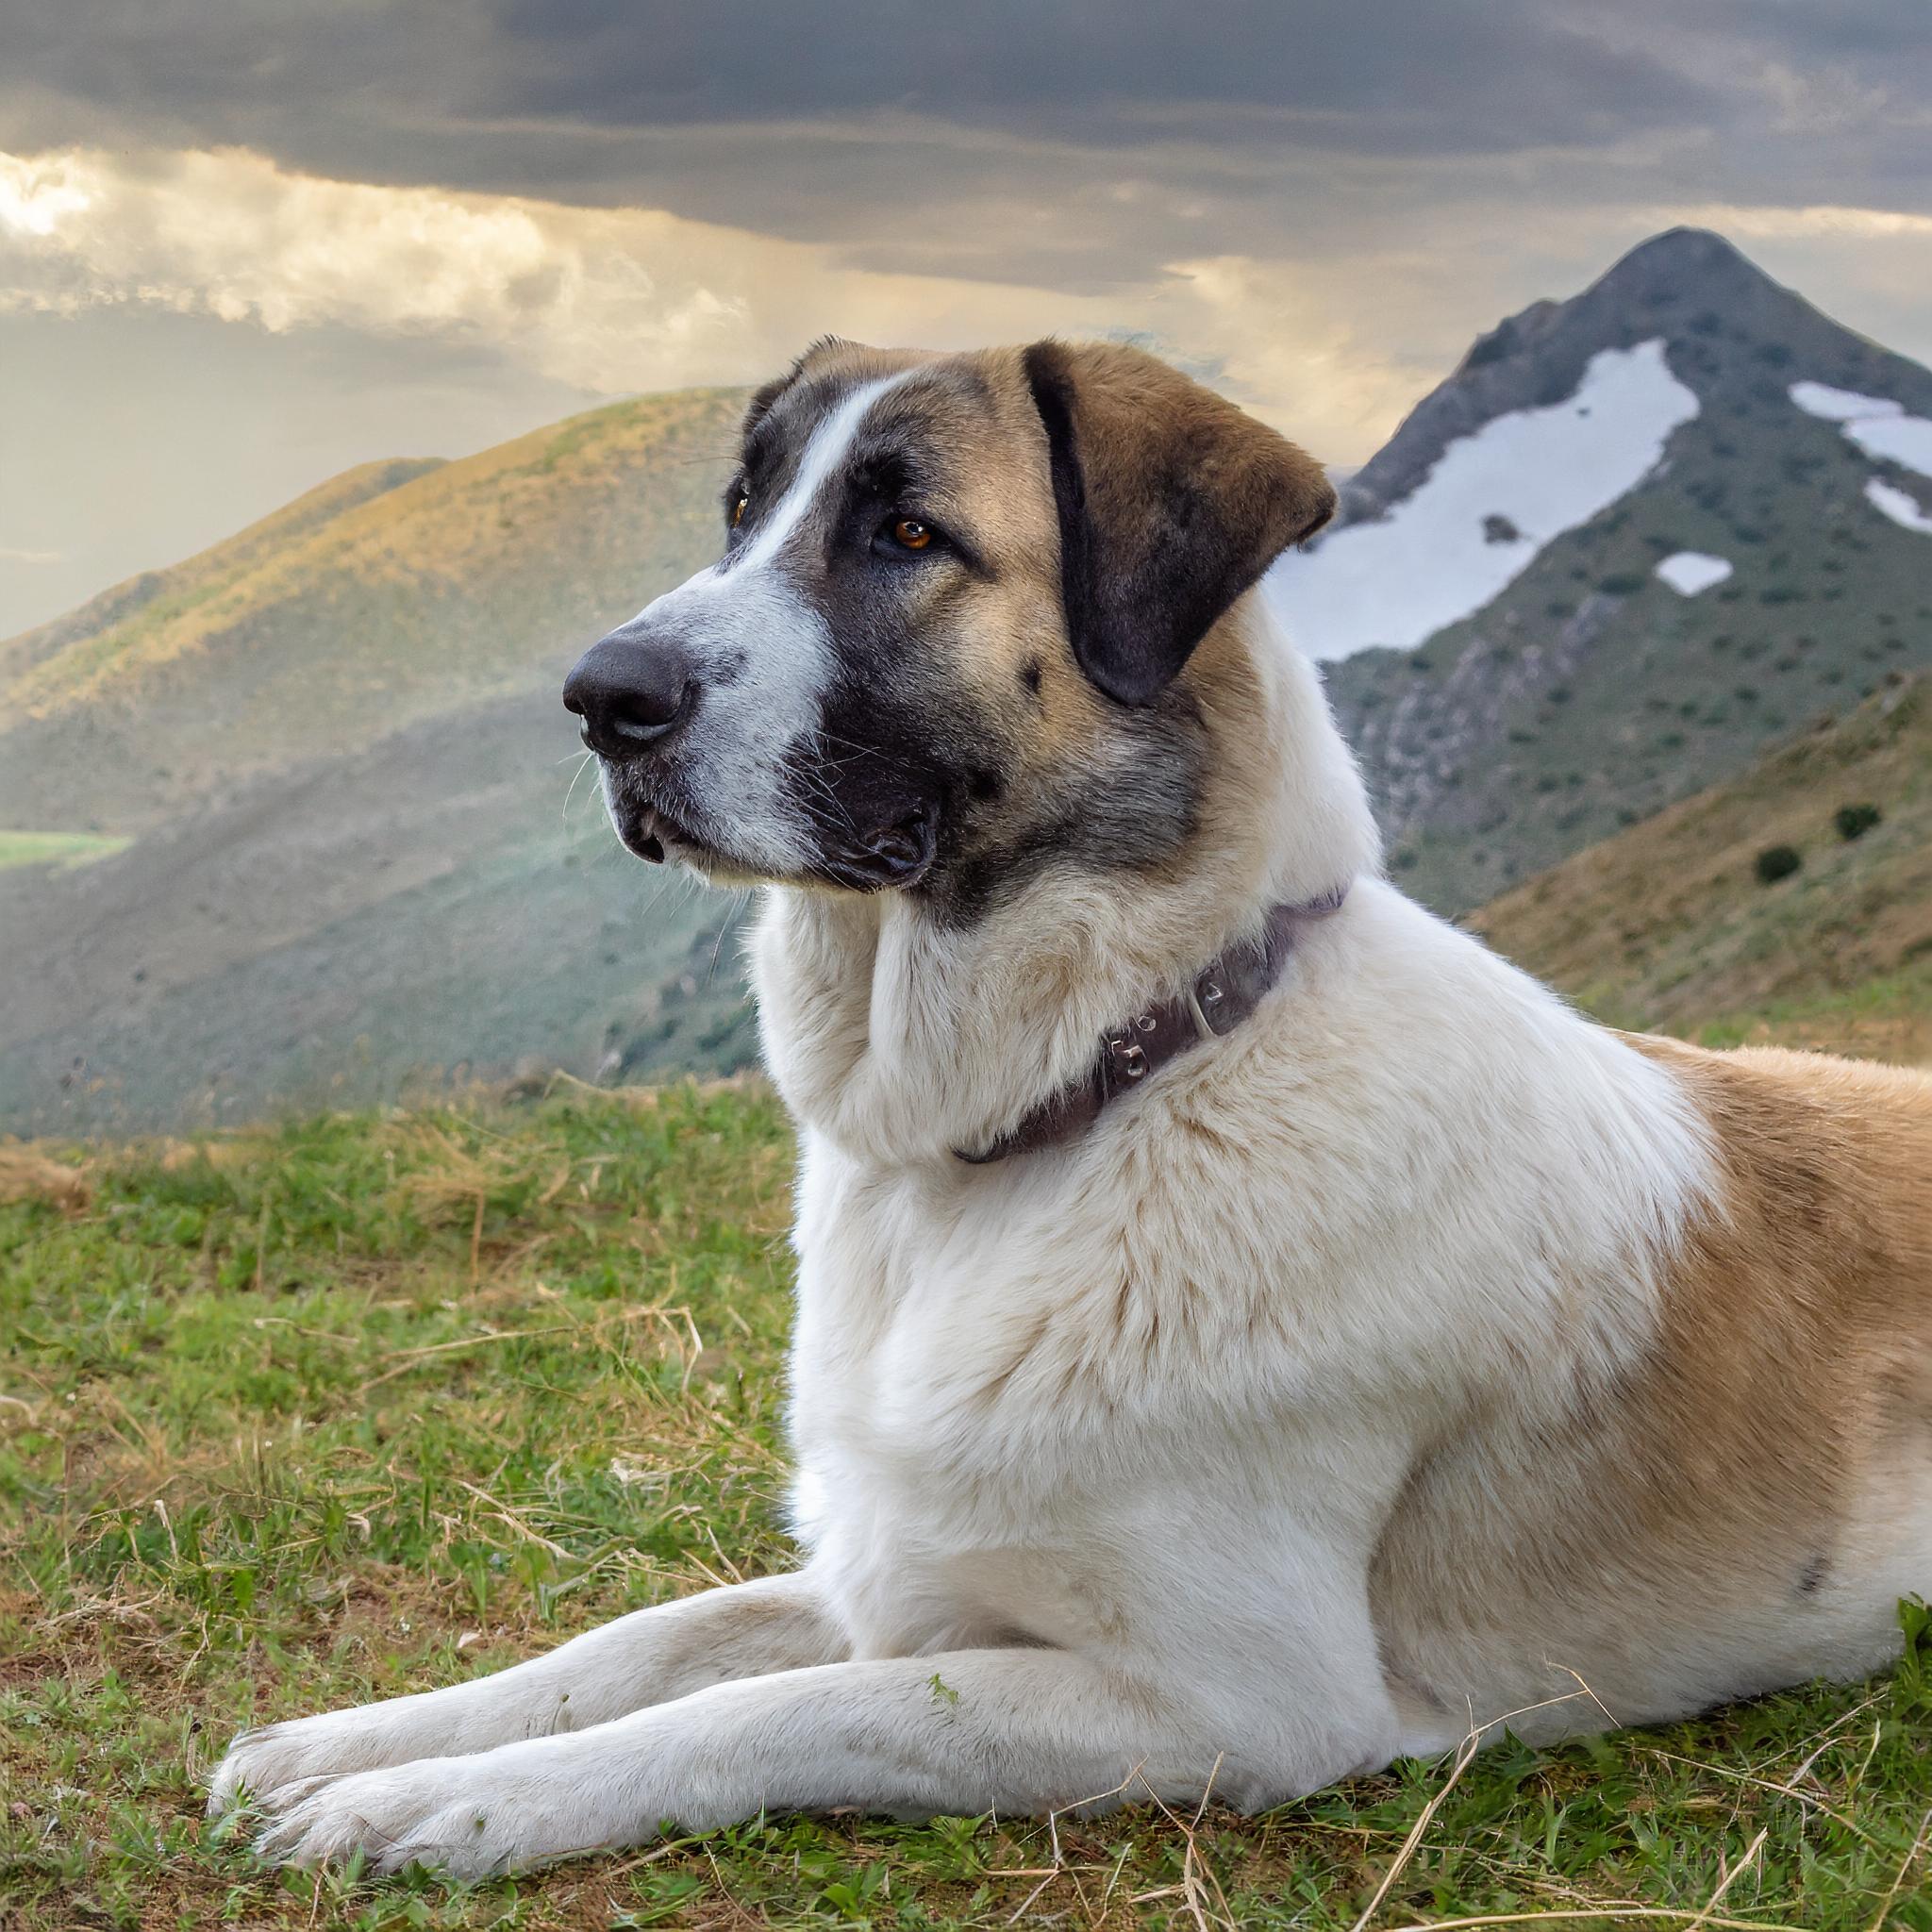 anatolian shepherd taking some well deserved rest while hiking